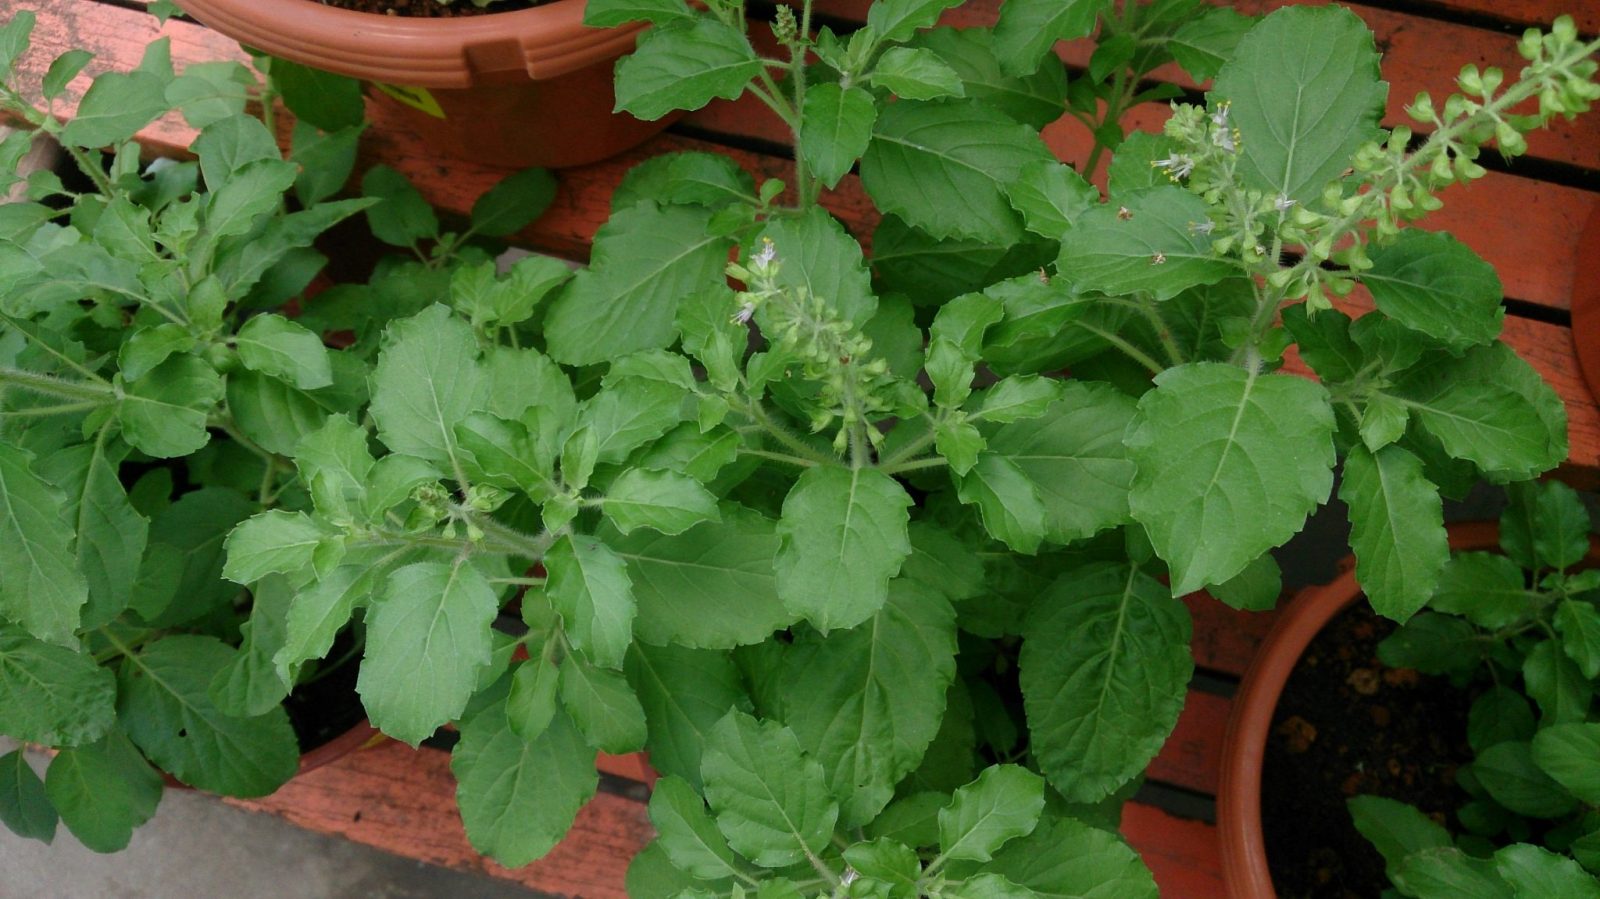 Holy Basil plants being grown in pots to be used to help treat Adrenal fatigue. 